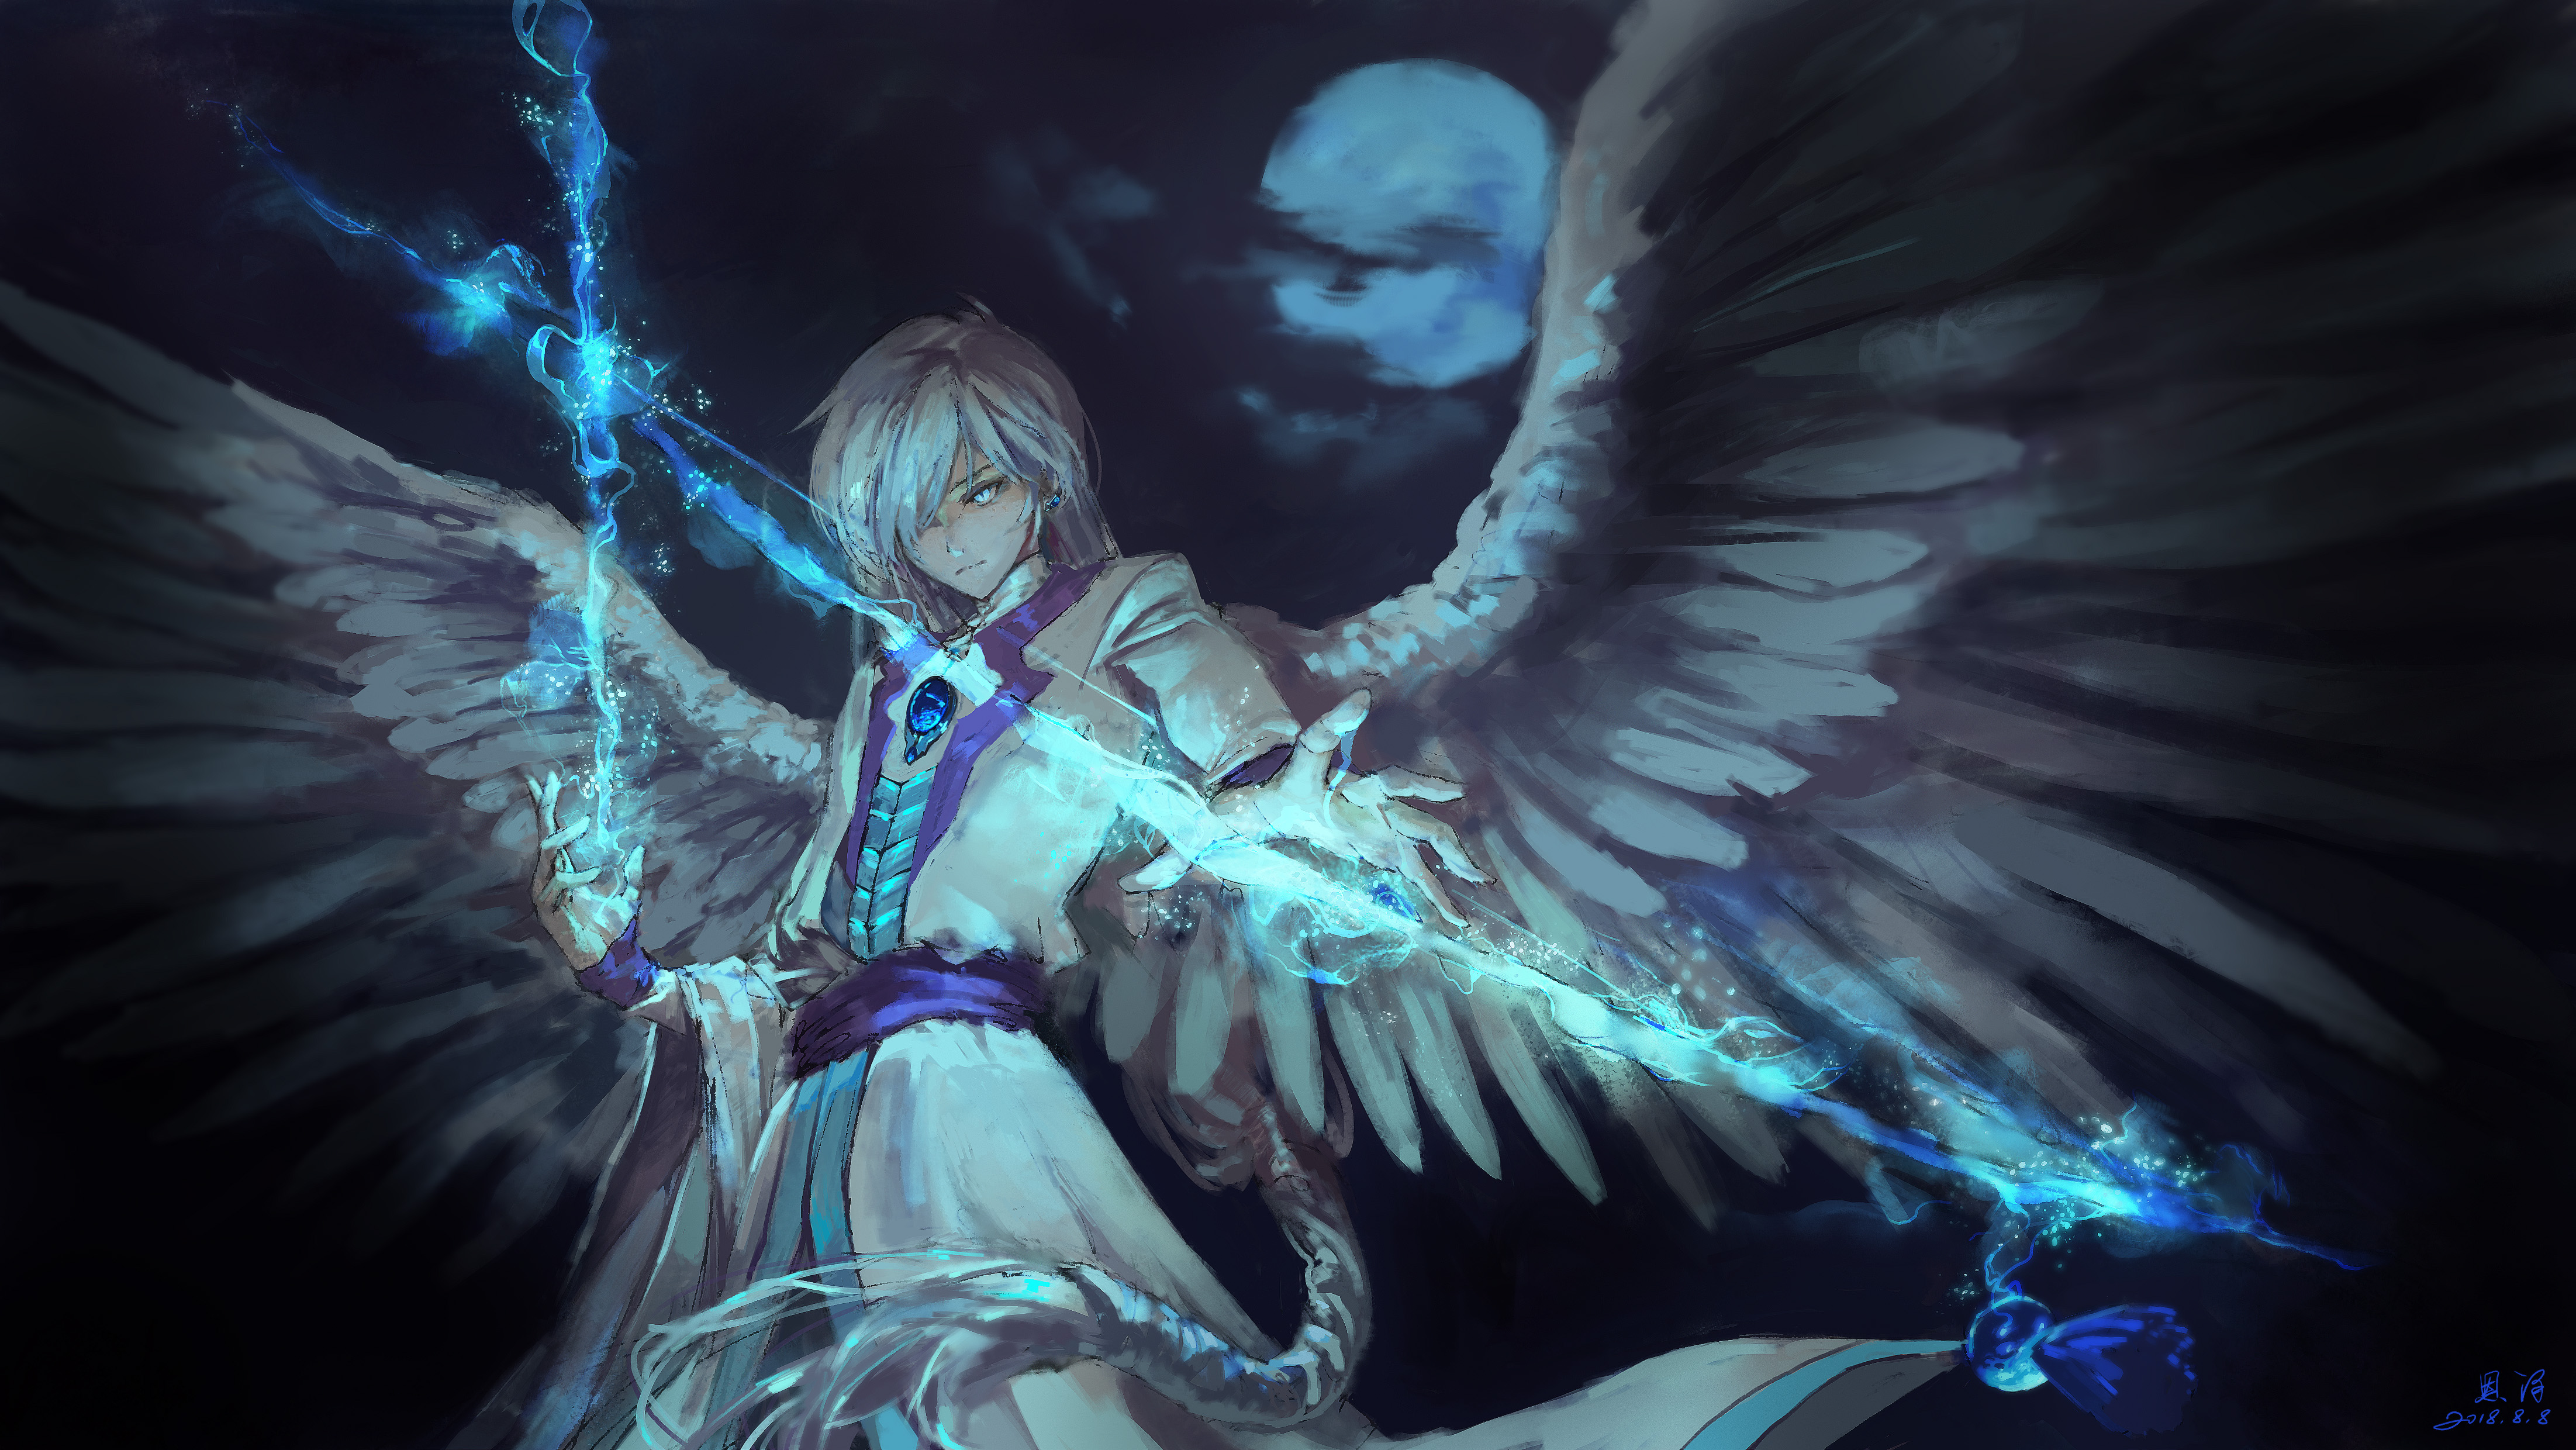 Blue Haired Anime Boys with Angel Wings - wide 8